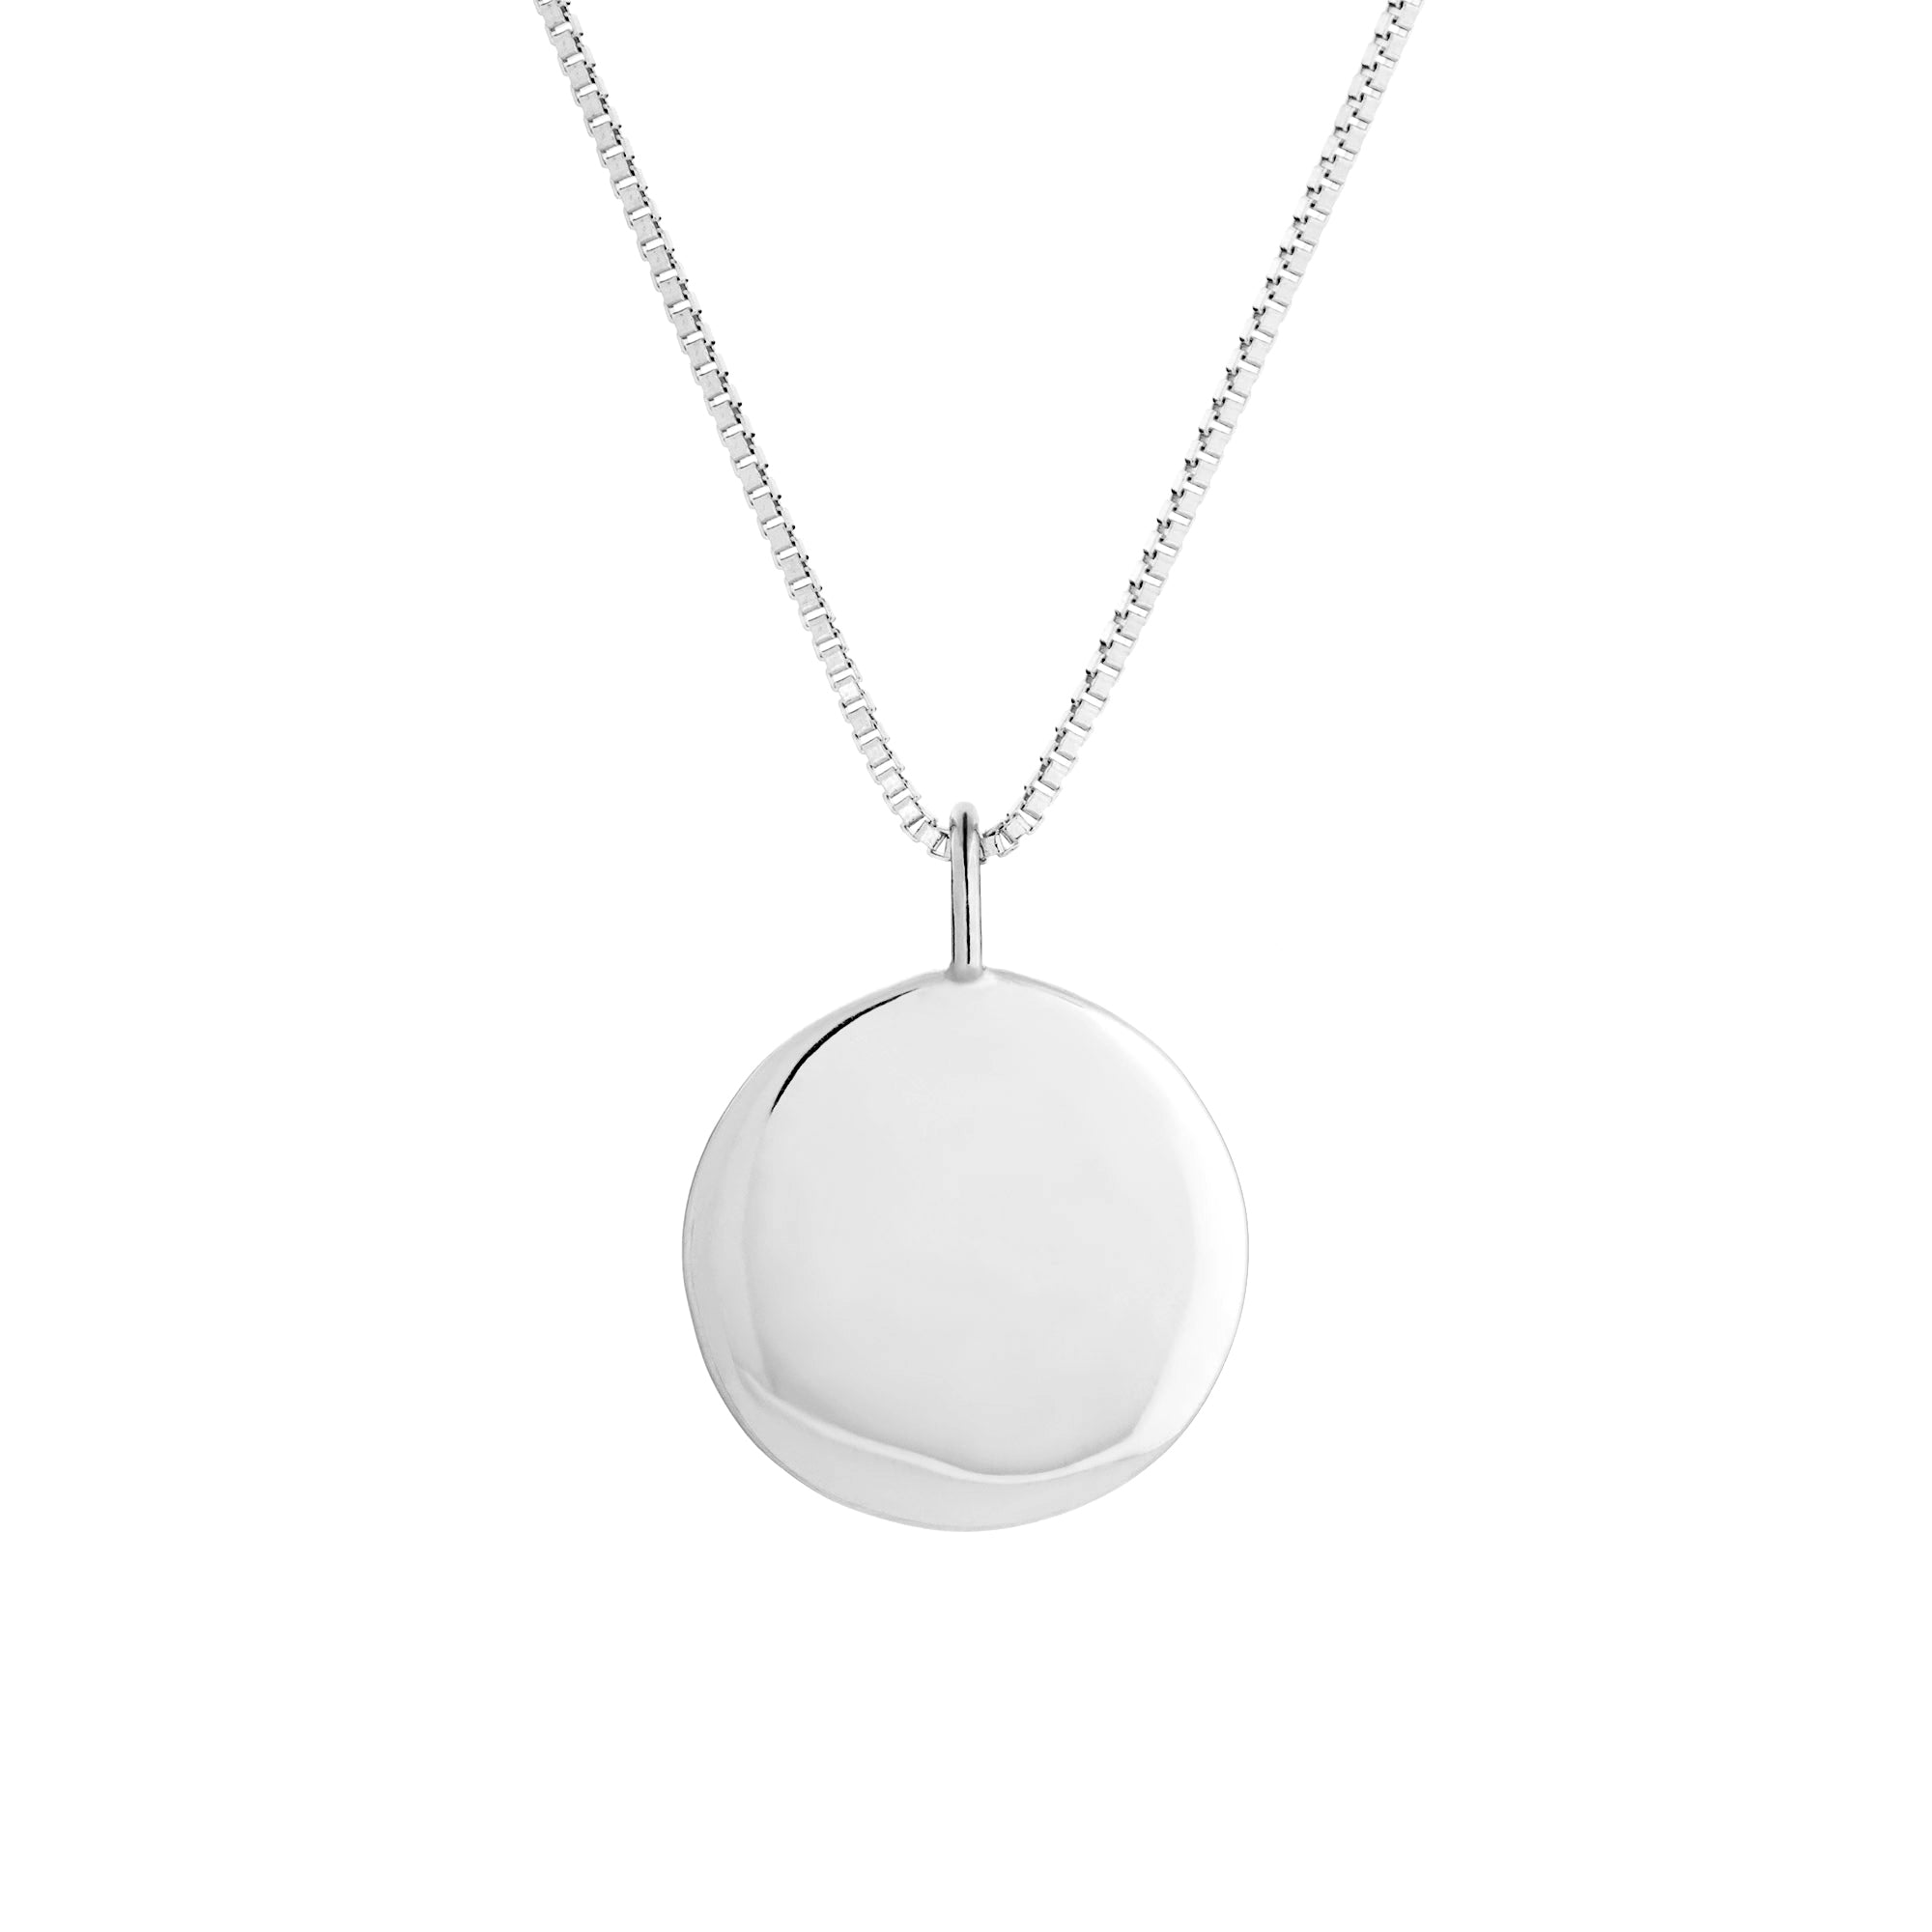 CLASSIC DISC NECKLACE - SILVER